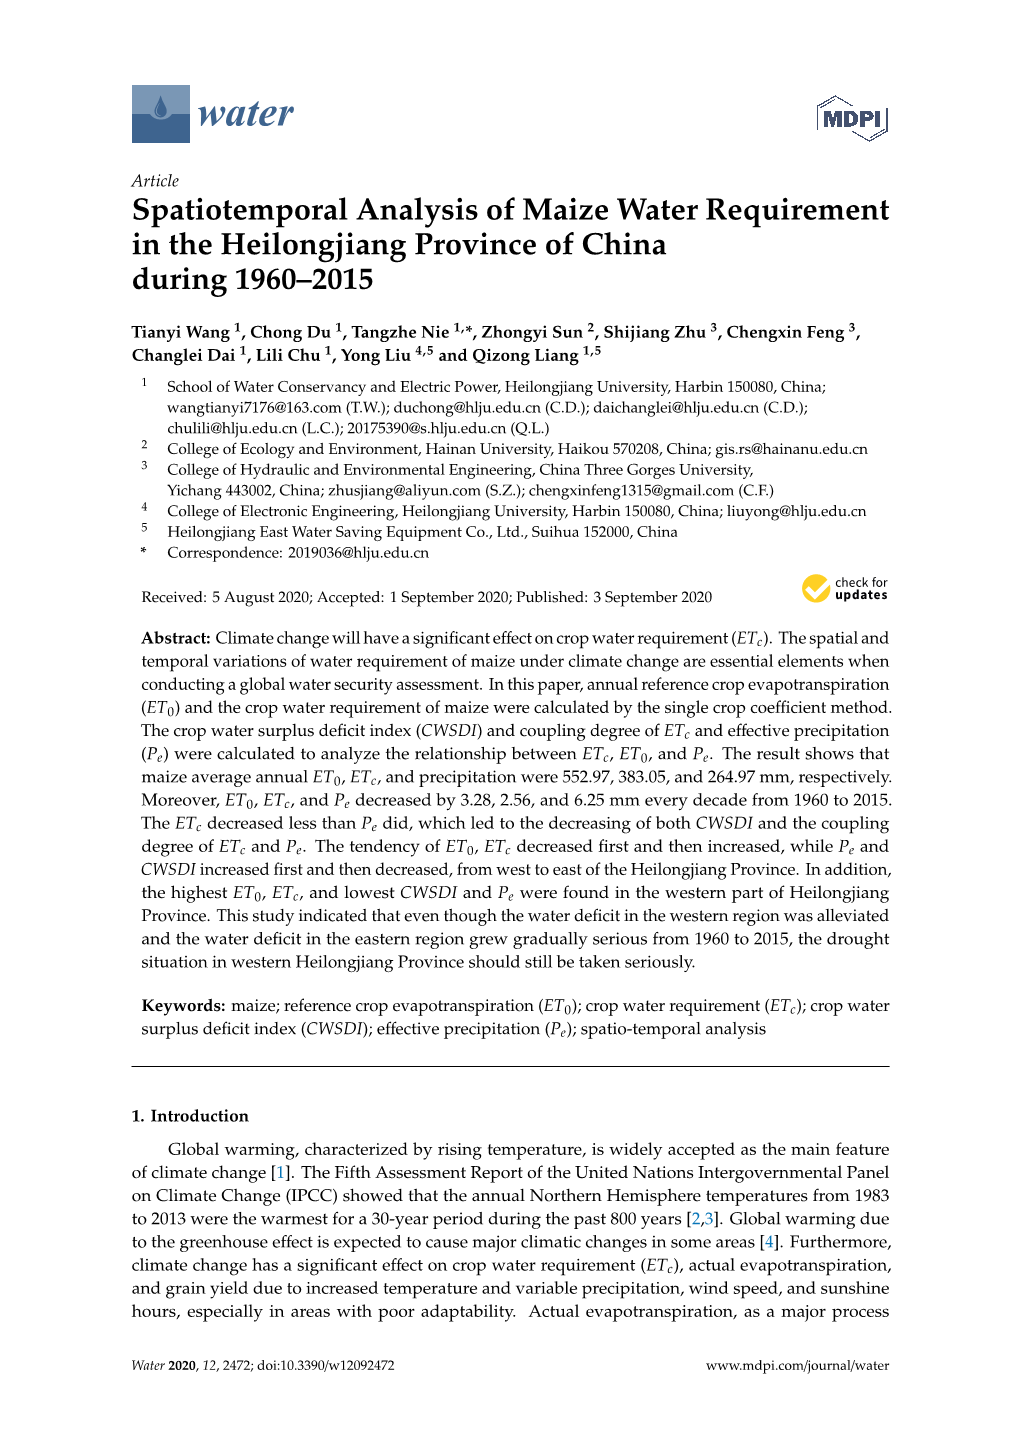 Spatiotemporal Analysis of Maize Water Requirement in the Heilongjiang Province of China During 1960–2015